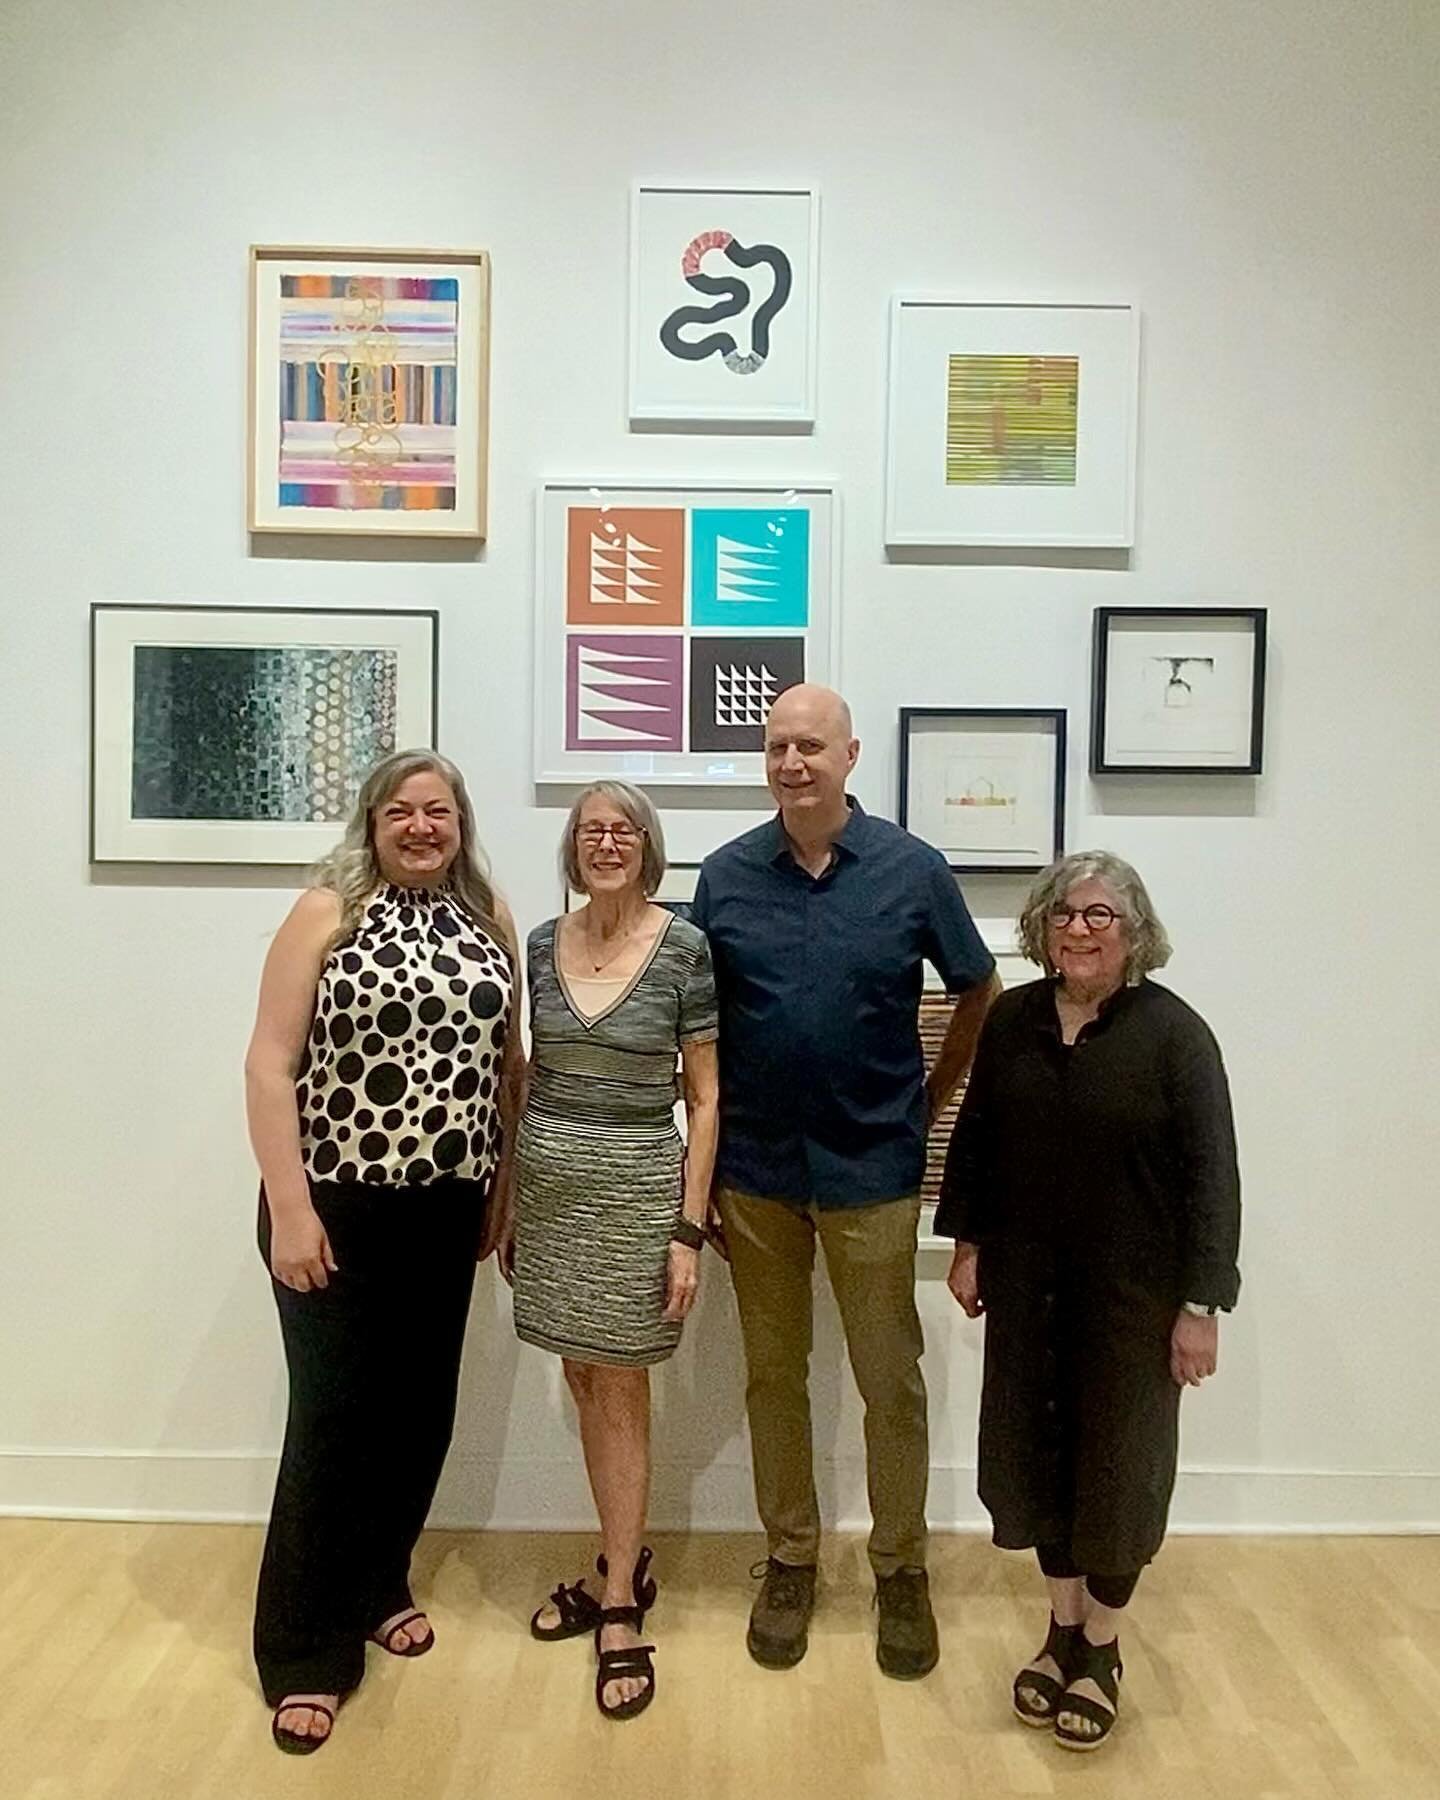 Thank you everyone for making this a beautiful opening reception! We loved seeing friends old and new, and if we could brag a little&hellip; the gallery looks fantastic! Permutations is open now through June 29, Thursdays through Saturdays 12-6pm.

P